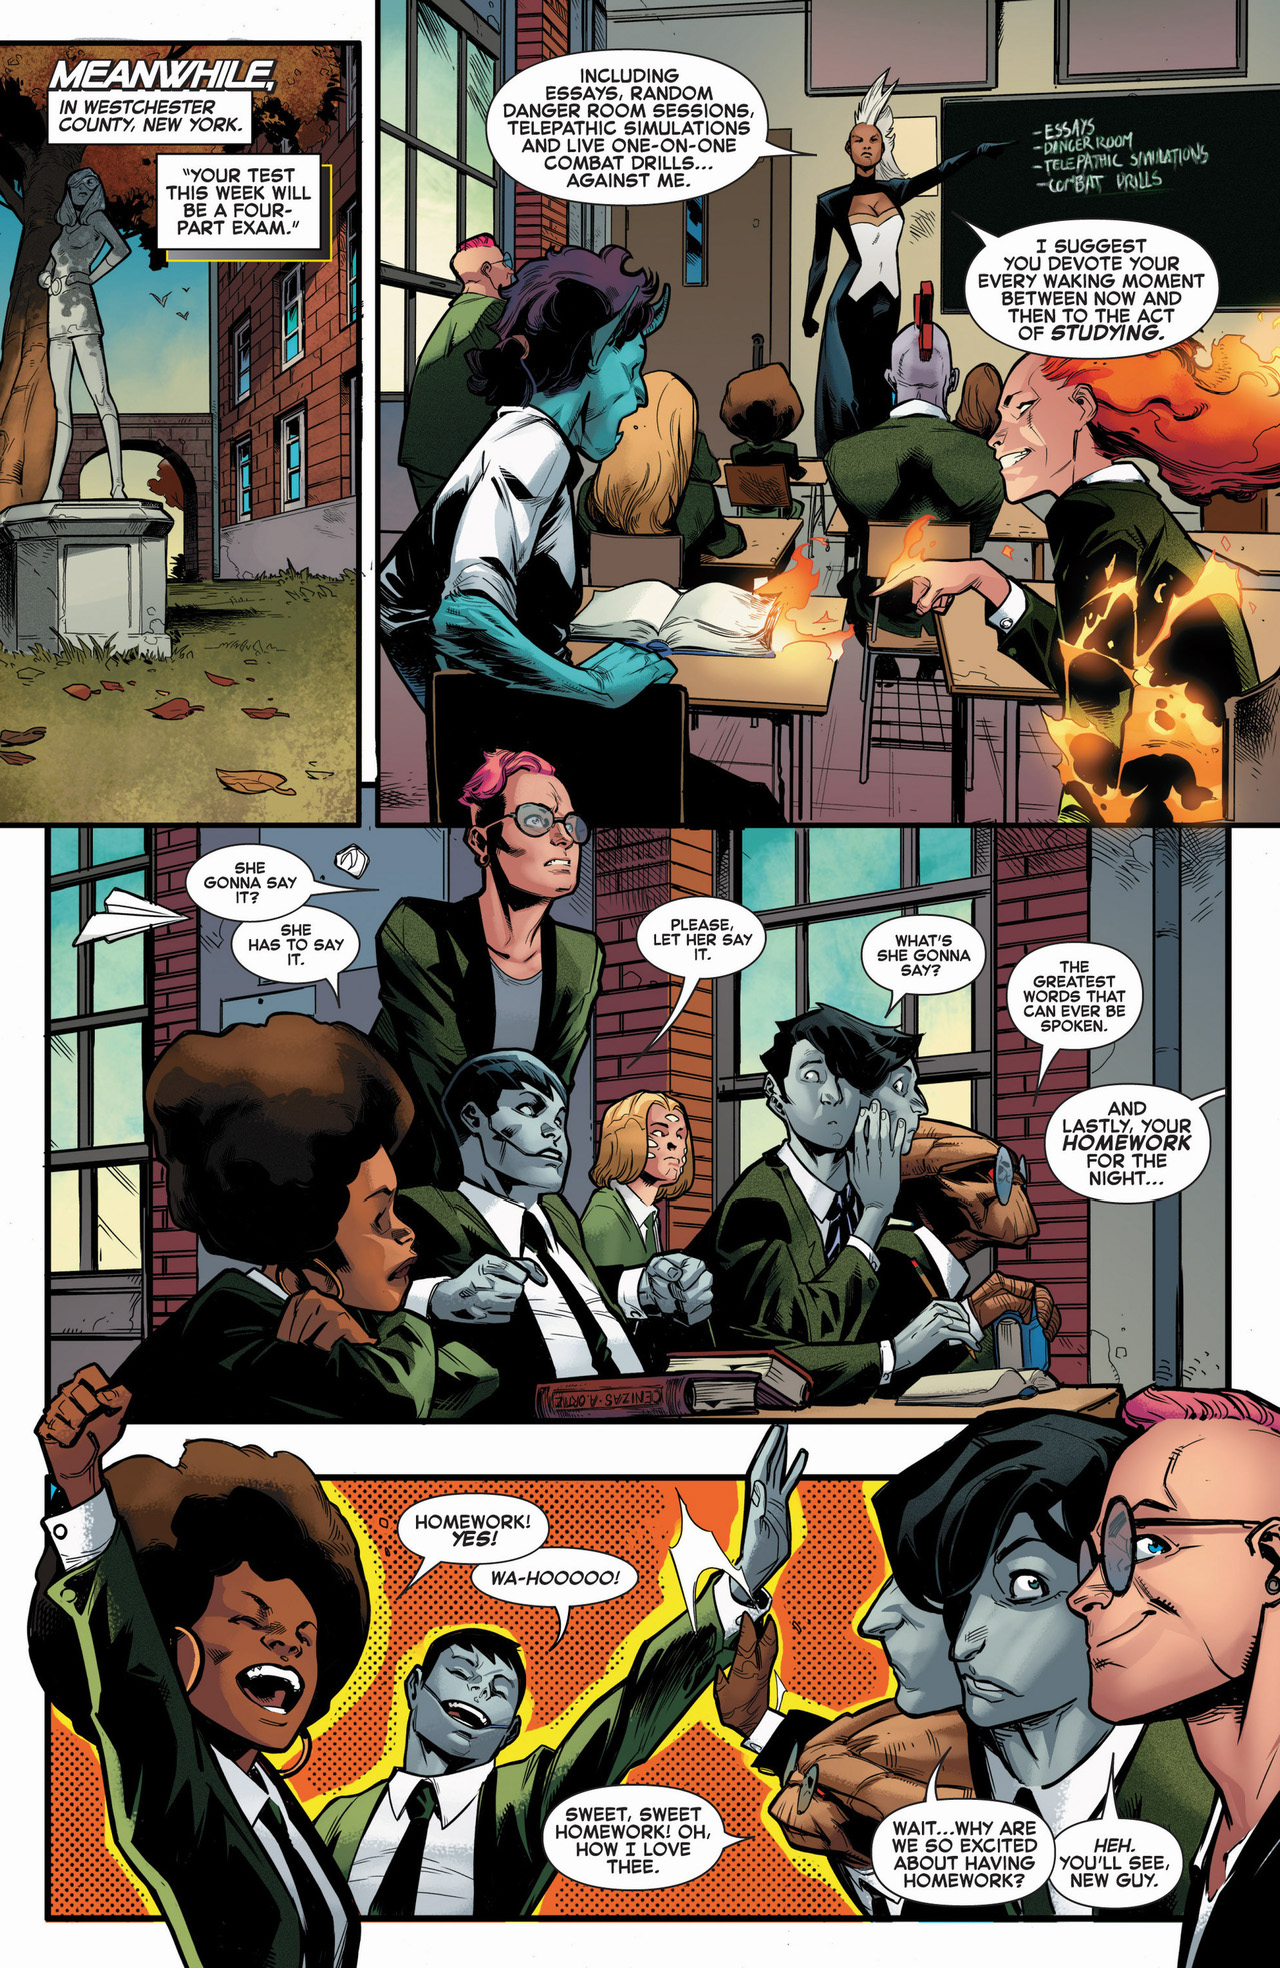 homework at the jean grey learning school 1